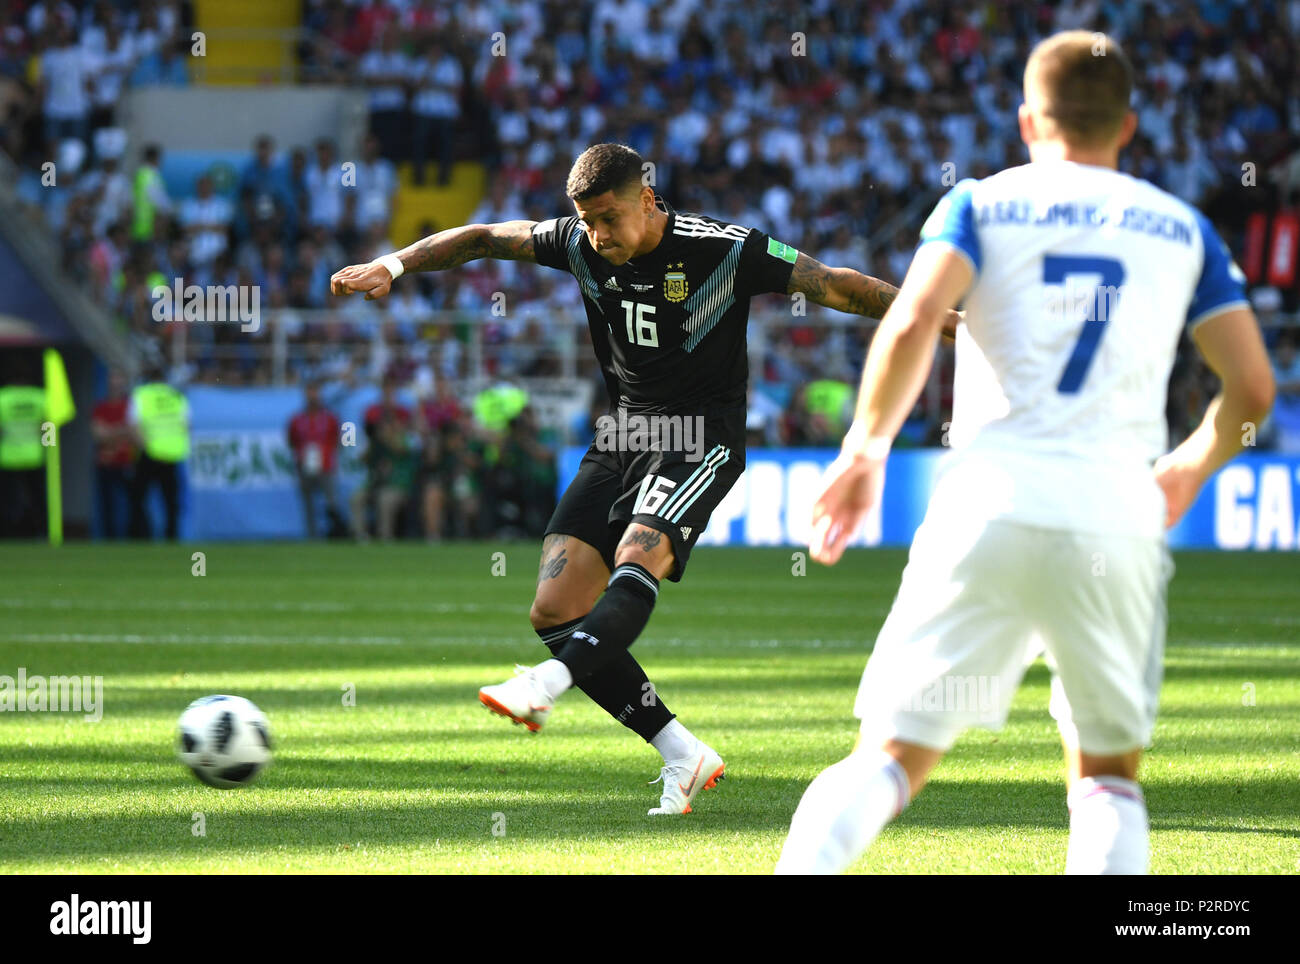 Moscow, Russia. 16th June, 2018. Marcos Rojo of Argentina shoots during a group D match between Argentina and Iceland at the 2018 FIFA World Cup in Moscow, Russia, June 16, 2018. Credit: Du Yu/Xinhua/Alamy Live News Stock Photo